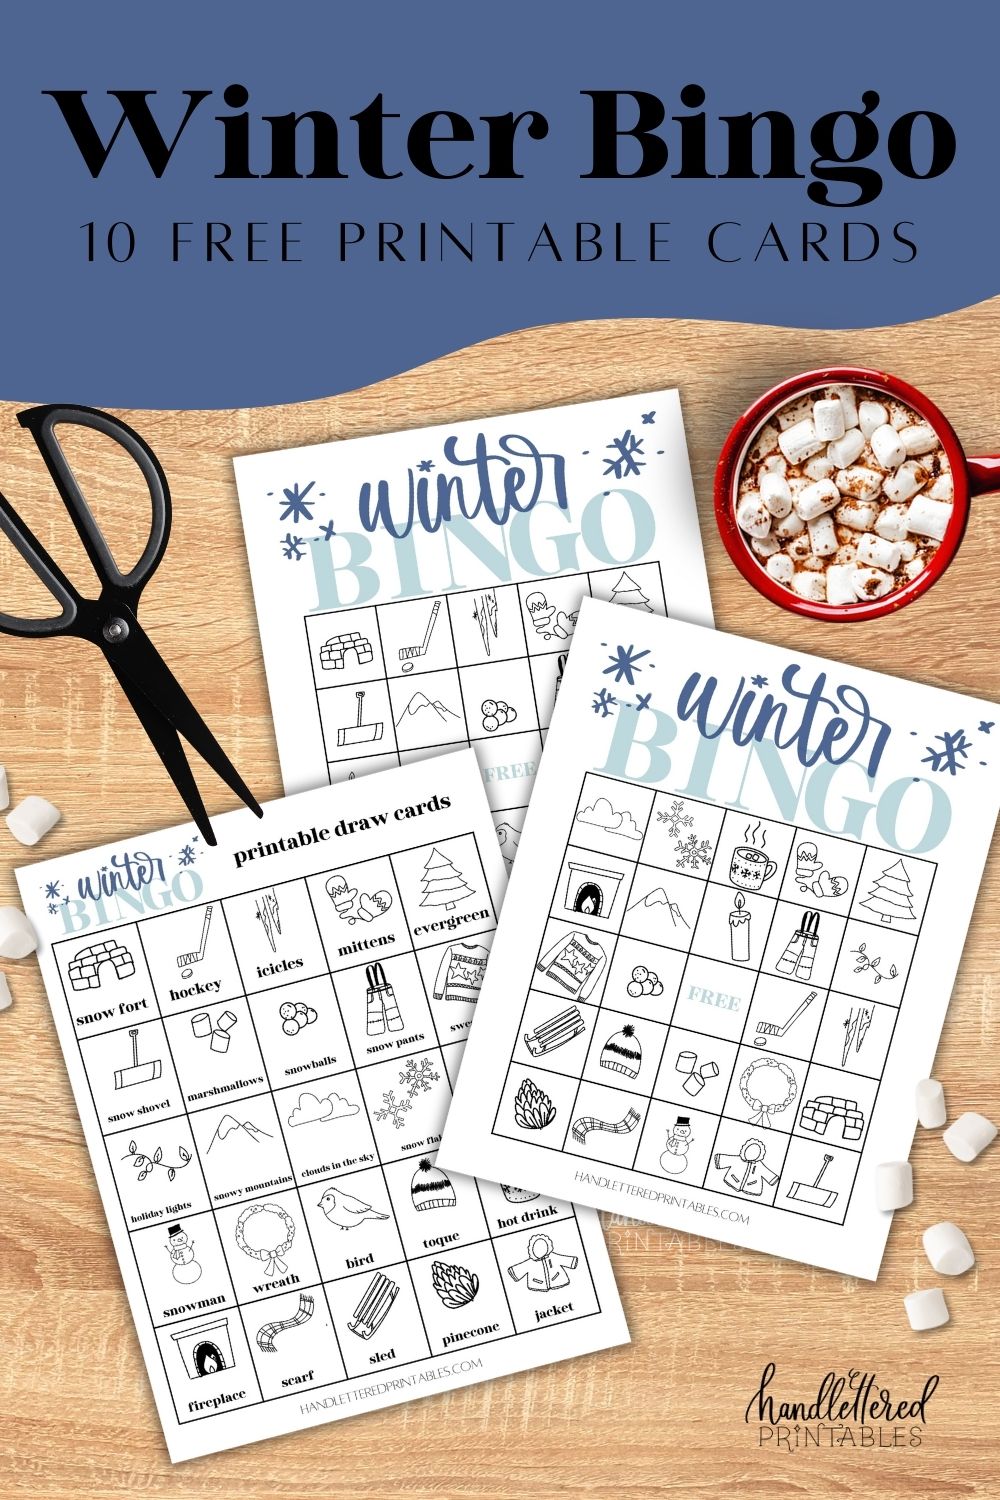 Winter themed bingo styled on wooden table with black scissors, cup of hot cocoa and lots of mini marshmallows. tet over reads winter bingo 10 free printable cards